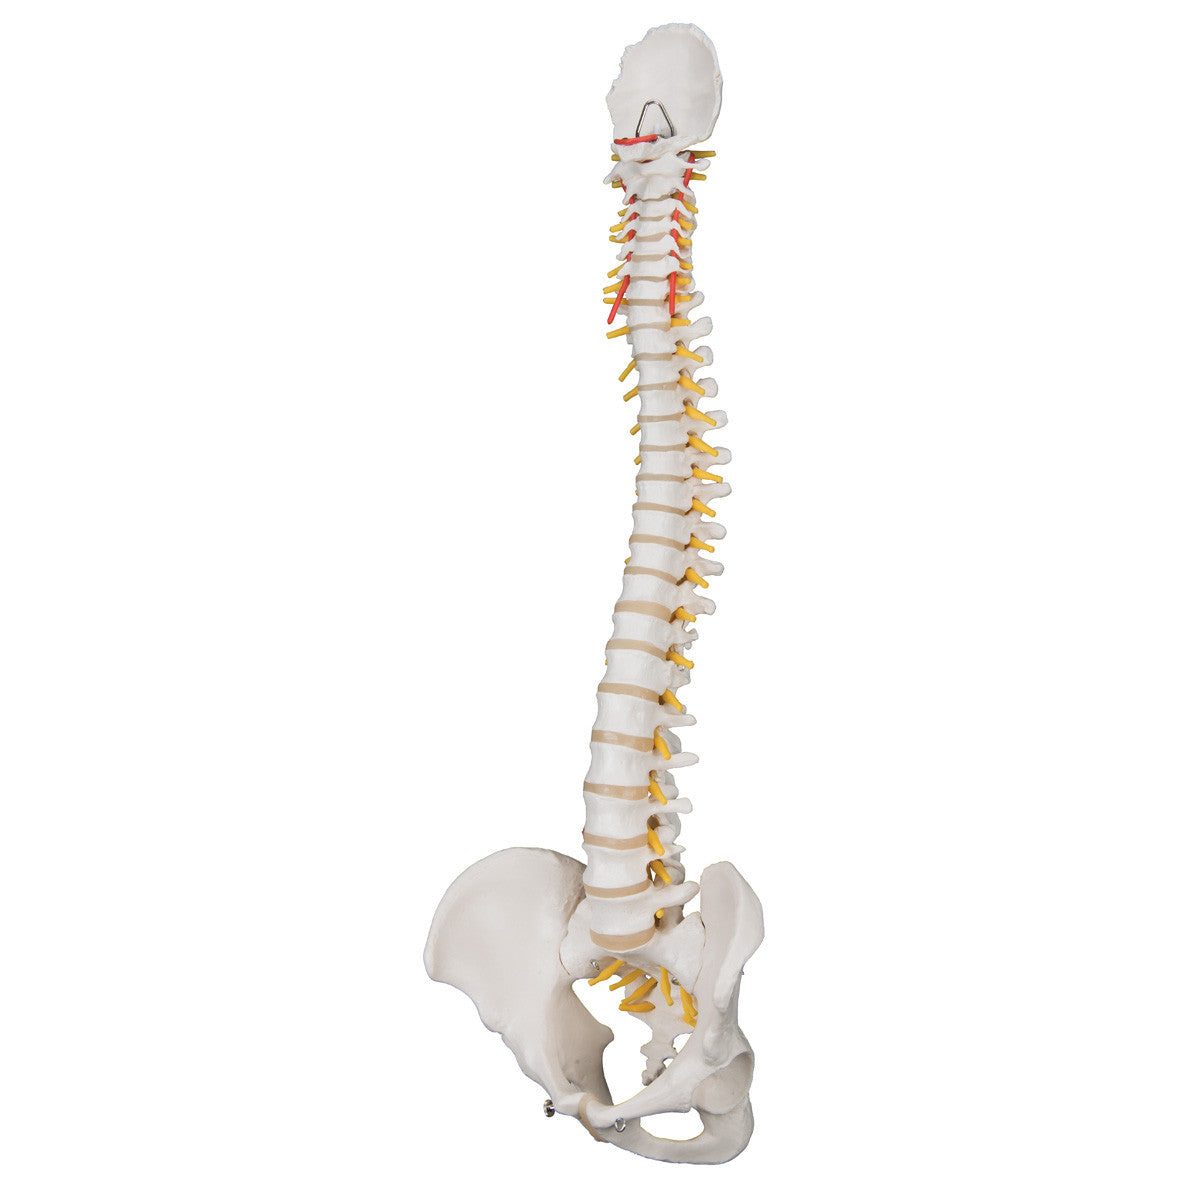 Standard Flexible Spine | 3B Scientific A58/1 - lateral